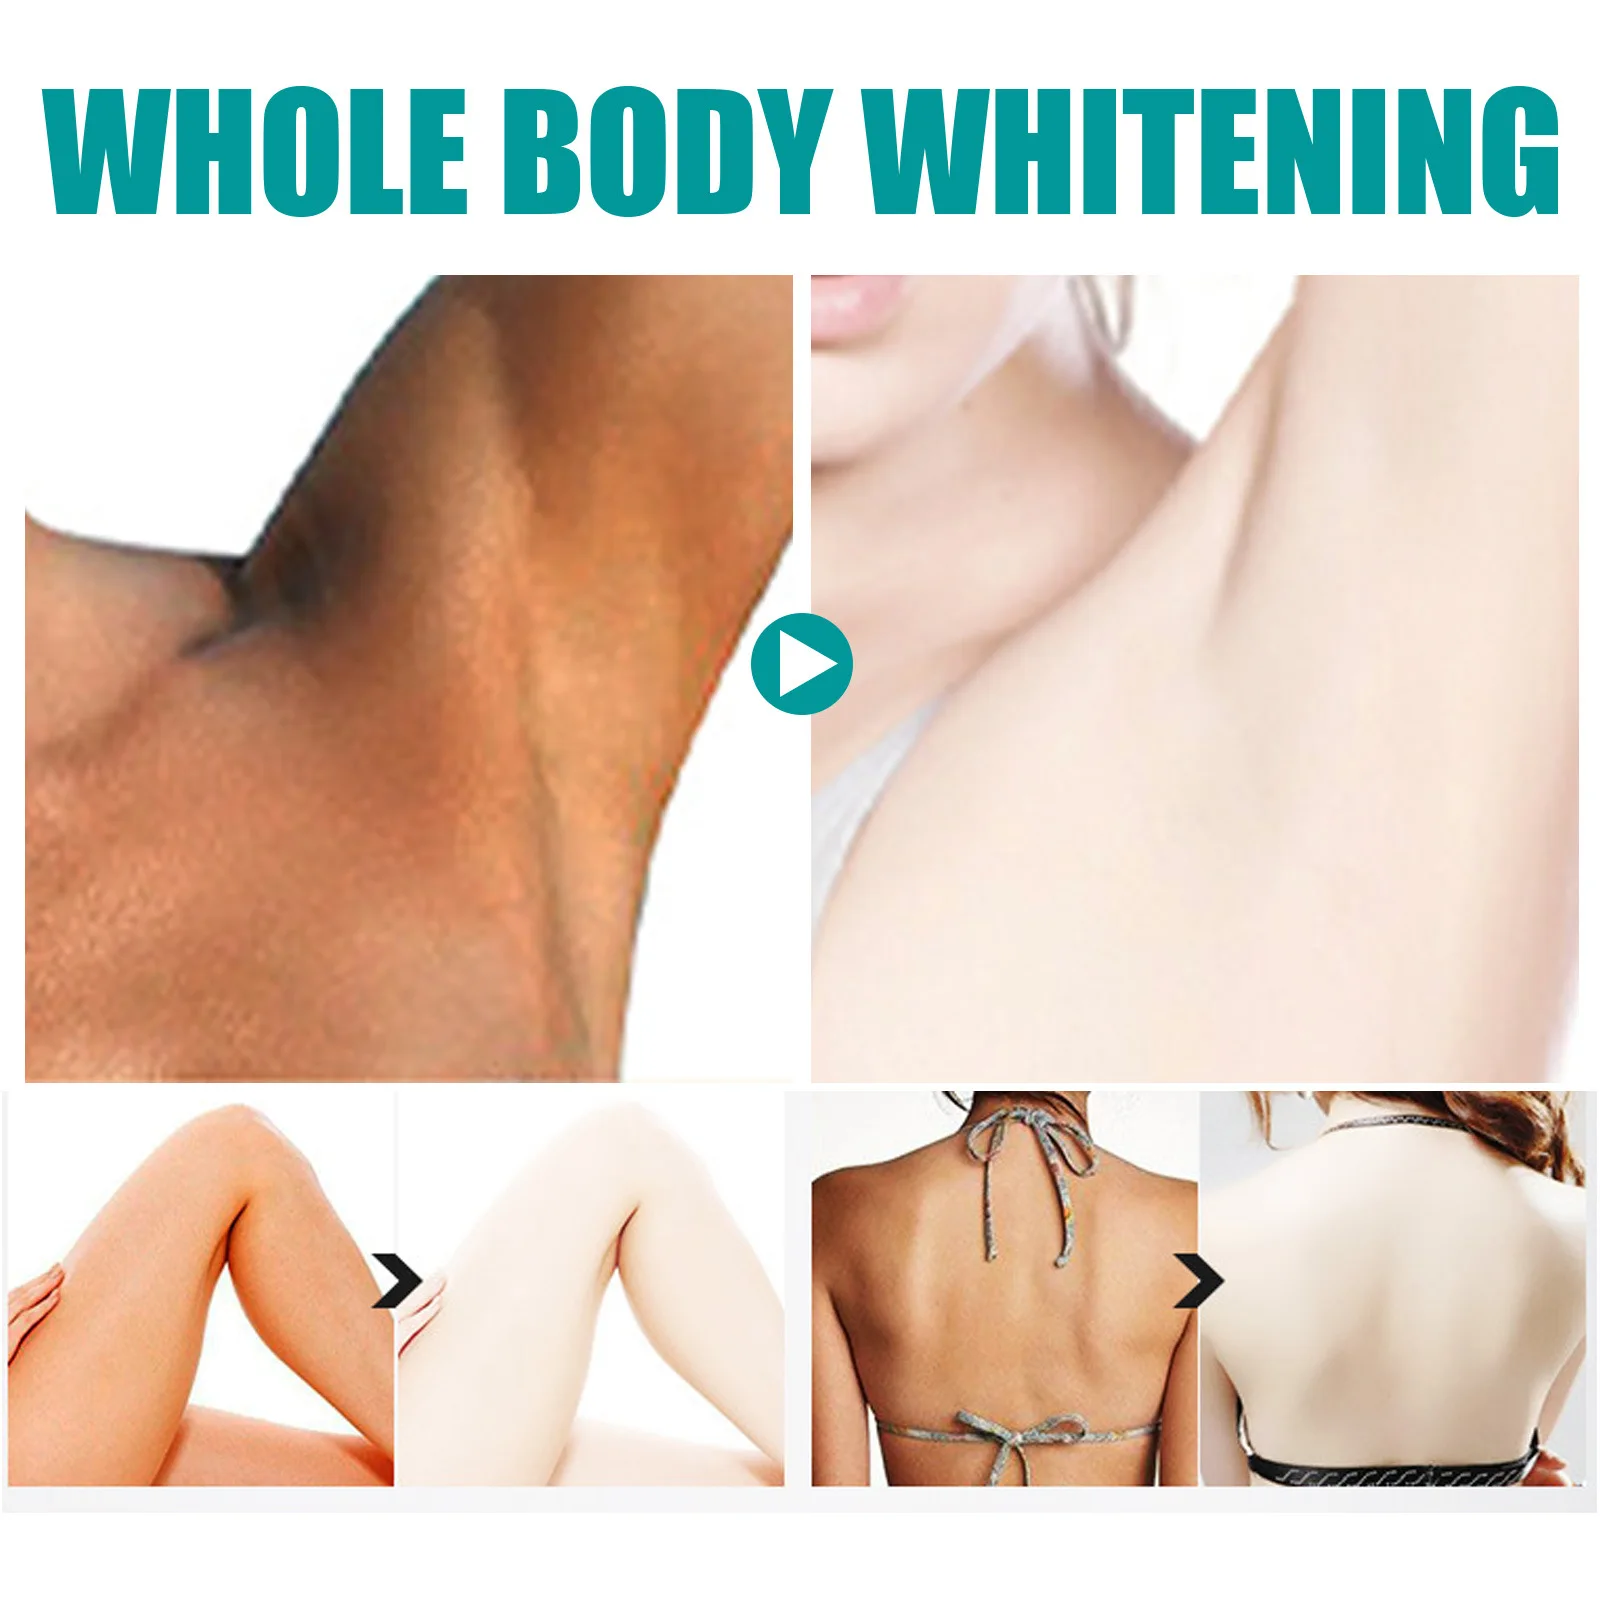 Whitening essence to remove private parts buttocks armpit dark spots and Blemishes skin  hip knee thigh inner melanin